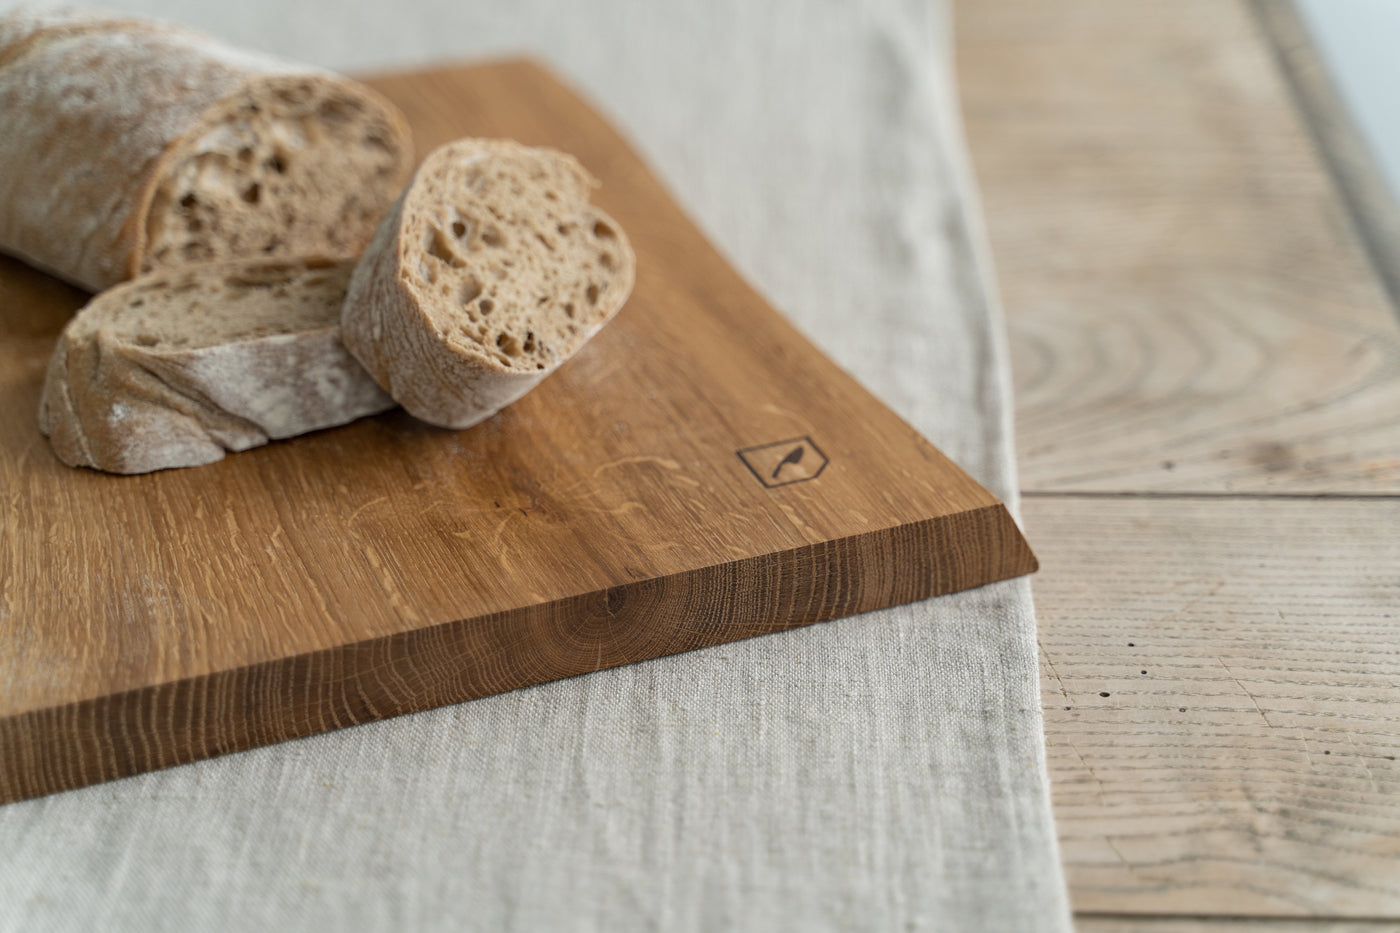 Mediea Large Oak Cutting Board-Cooking and Eating-COOKING/SERVING TOOLS, TABLEWARE, TRAYS / BOARDS-Forest Homes-Nature inspired decor-Nature decor